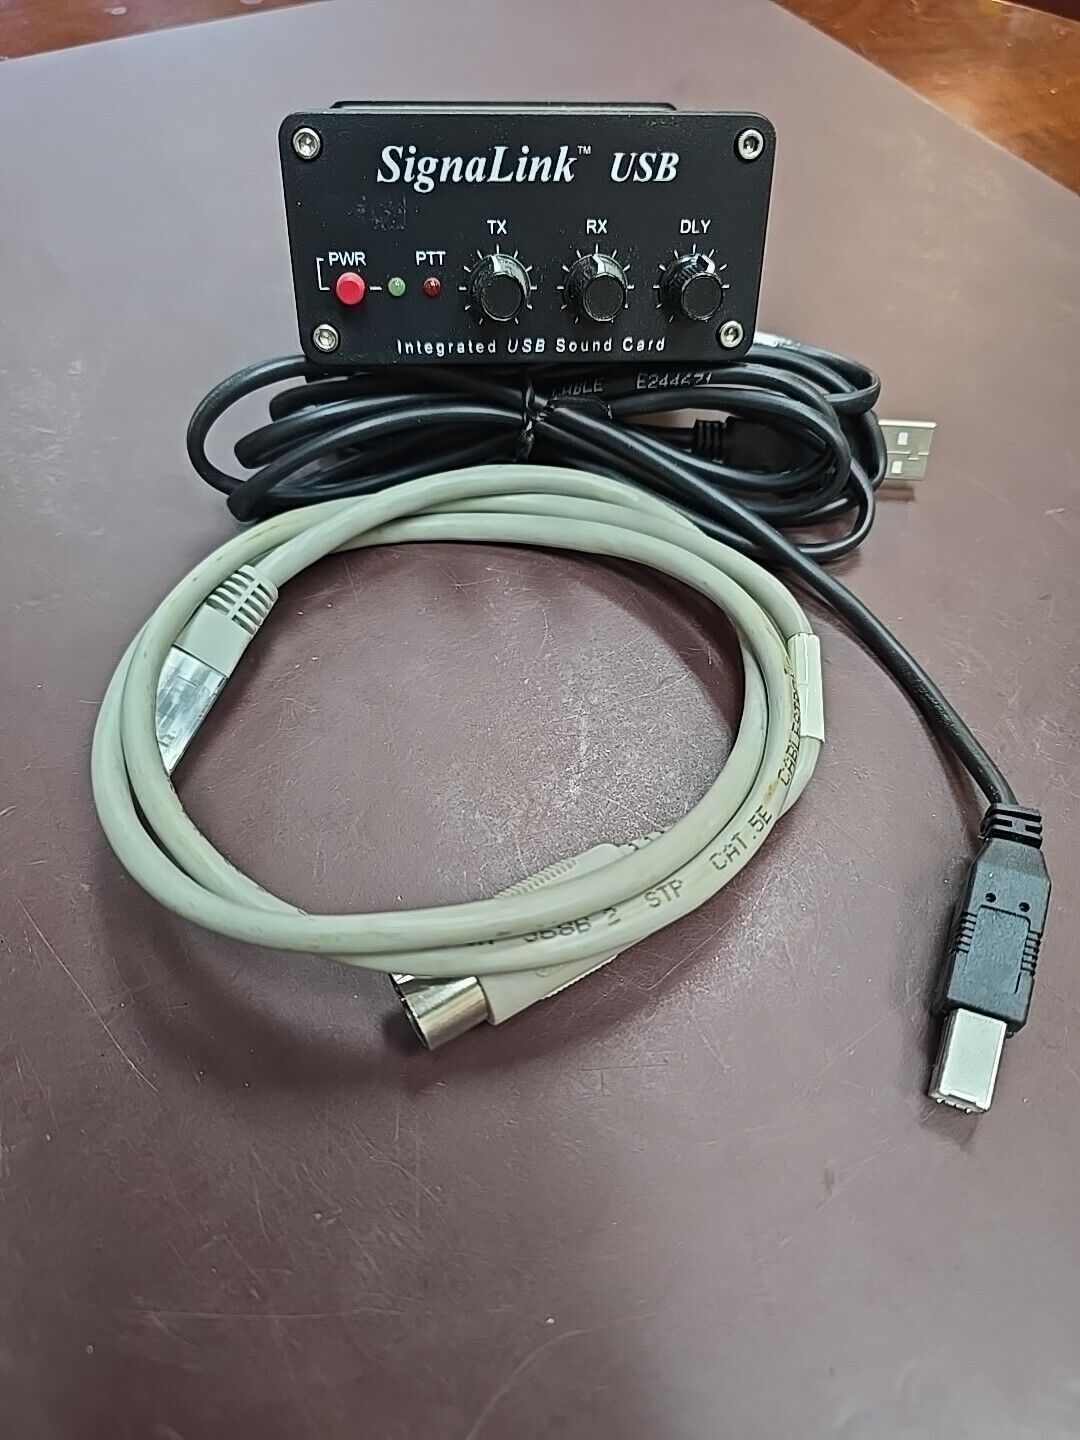 SIGNALINK USB Tigertronics SLUSB13I For Icom 13-PIN SLCAB13I Cable Included. Available Now for $109.00